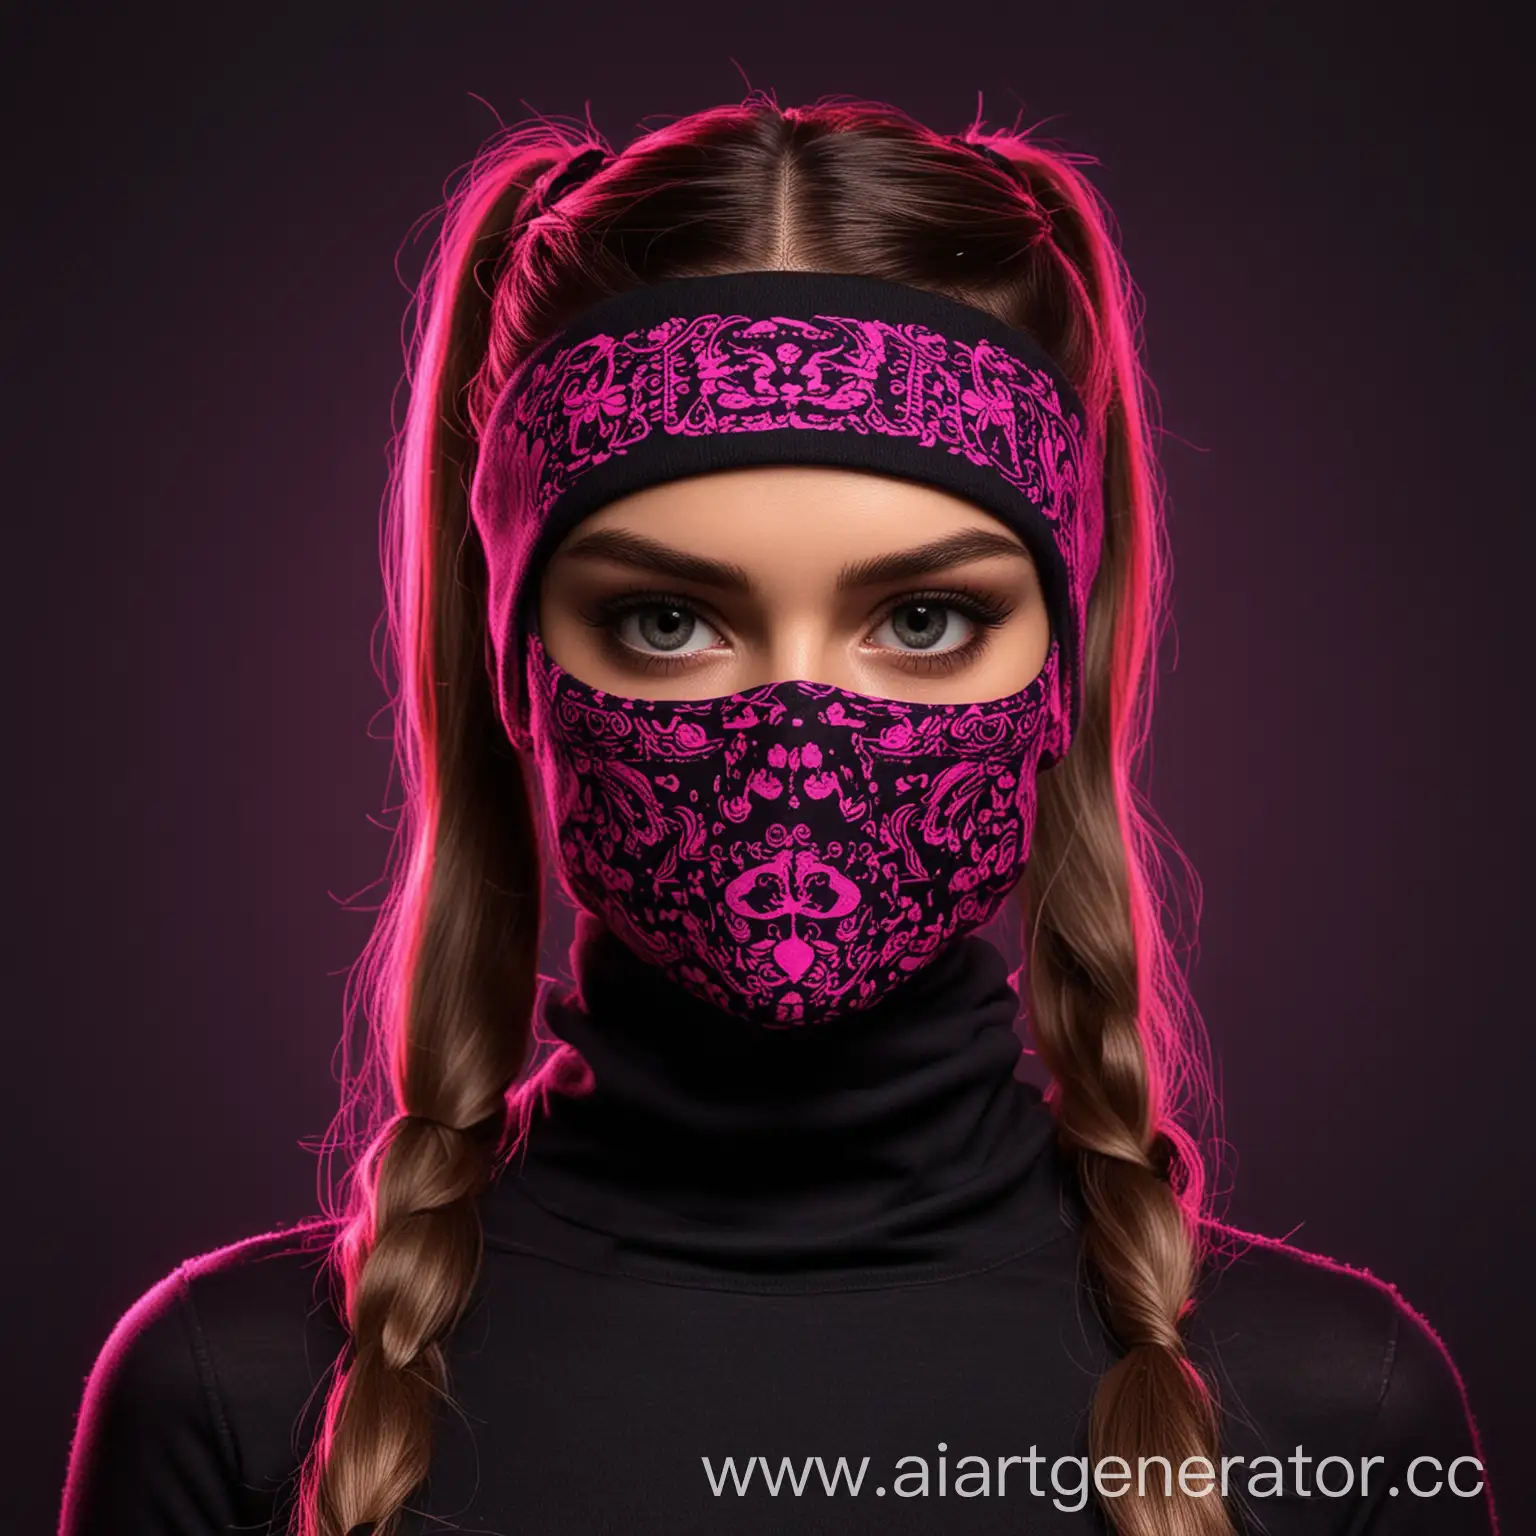 Neon-Pink-Balaclava-2D-Pattern-on-Black-Background-with-DisneyInspired-Ponytails